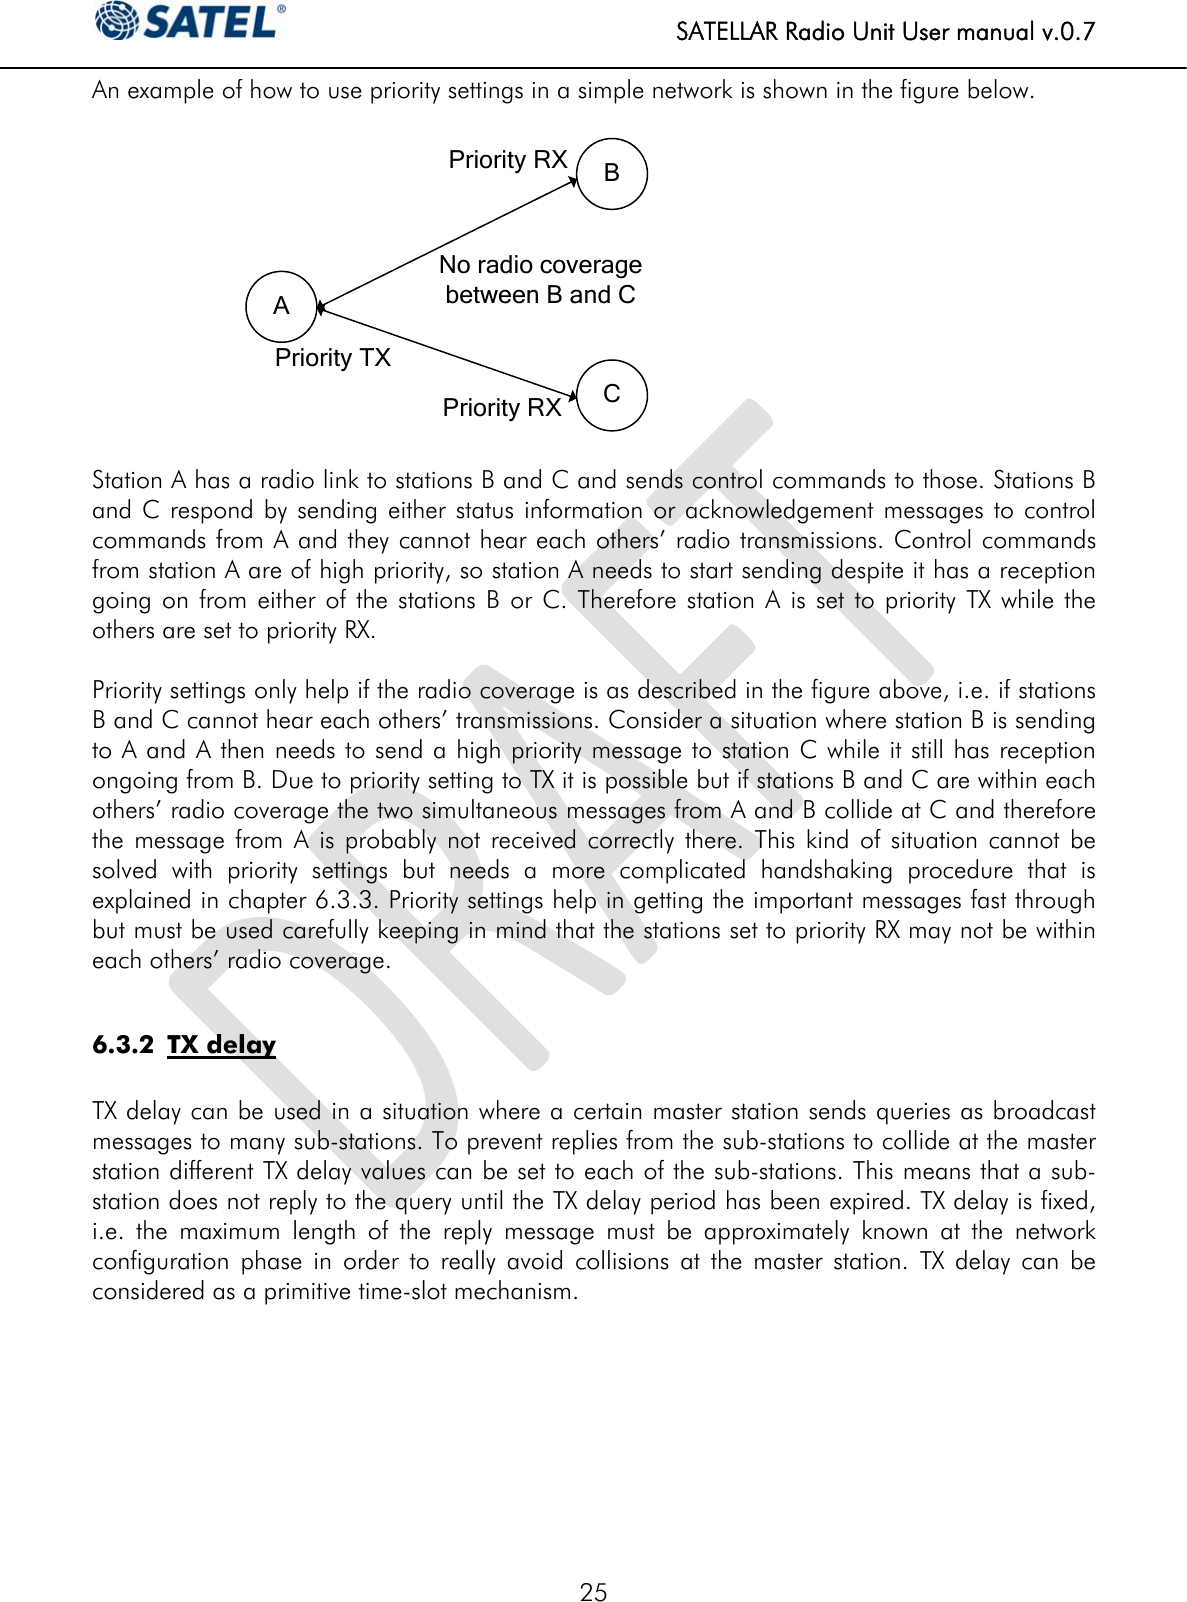   SATELLAR Radio Unit User manual v.0.7  25 An example of how to use priority settings in a simple network is shown in the figure below.  ABCPriority TXPriority RXPriority RXNo radio coverage between B and C  Station A has a radio link to stations B and C and sends control commands to those. Stations B and C respond by sending either status information or acknowledgement messages to control commands from A and they cannot hear each others’ radio transmissions. Control commands from station A are of high priority, so station A needs to start sending despite it has a reception going on from either of the stations B or C. Therefore station A is set to priority TX while the others are set to priority RX.   Priority settings only help if the radio coverage is as described in the figure above, i.e. if stations B and C cannot hear each others’ transmissions. Consider a situation where station B is sending to A and A then needs to send a high priority message to station C while it still has reception ongoing from B. Due to priority setting to TX it is possible but if stations B and C are within each others’ radio coverage the two simultaneous messages from A and B collide at C and therefore the message from A is probably not received correctly there. This kind of situation cannot be solved with priority settings but needs a more complicated handshaking procedure that is explained in chapter 6.3.3. Priority settings help in getting the important messages fast through but must be used carefully keeping in mind that the stations set to priority RX may not be within each others’ radio coverage.  6.3.2 TX delay  TX delay can be used in a situation where a certain master station sends queries as broadcast messages to many sub-stations. To prevent replies from the sub-stations to collide at the master station different TX delay values can be set to each of the sub-stations. This means that a sub-station does not reply to the query until the TX delay period has been expired. TX delay is fixed, i.e. the maximum length of the reply message must be approximately known at the network configuration phase in order to really avoid collisions at the master station. TX delay can be considered as a primitive time-slot mechanism.        